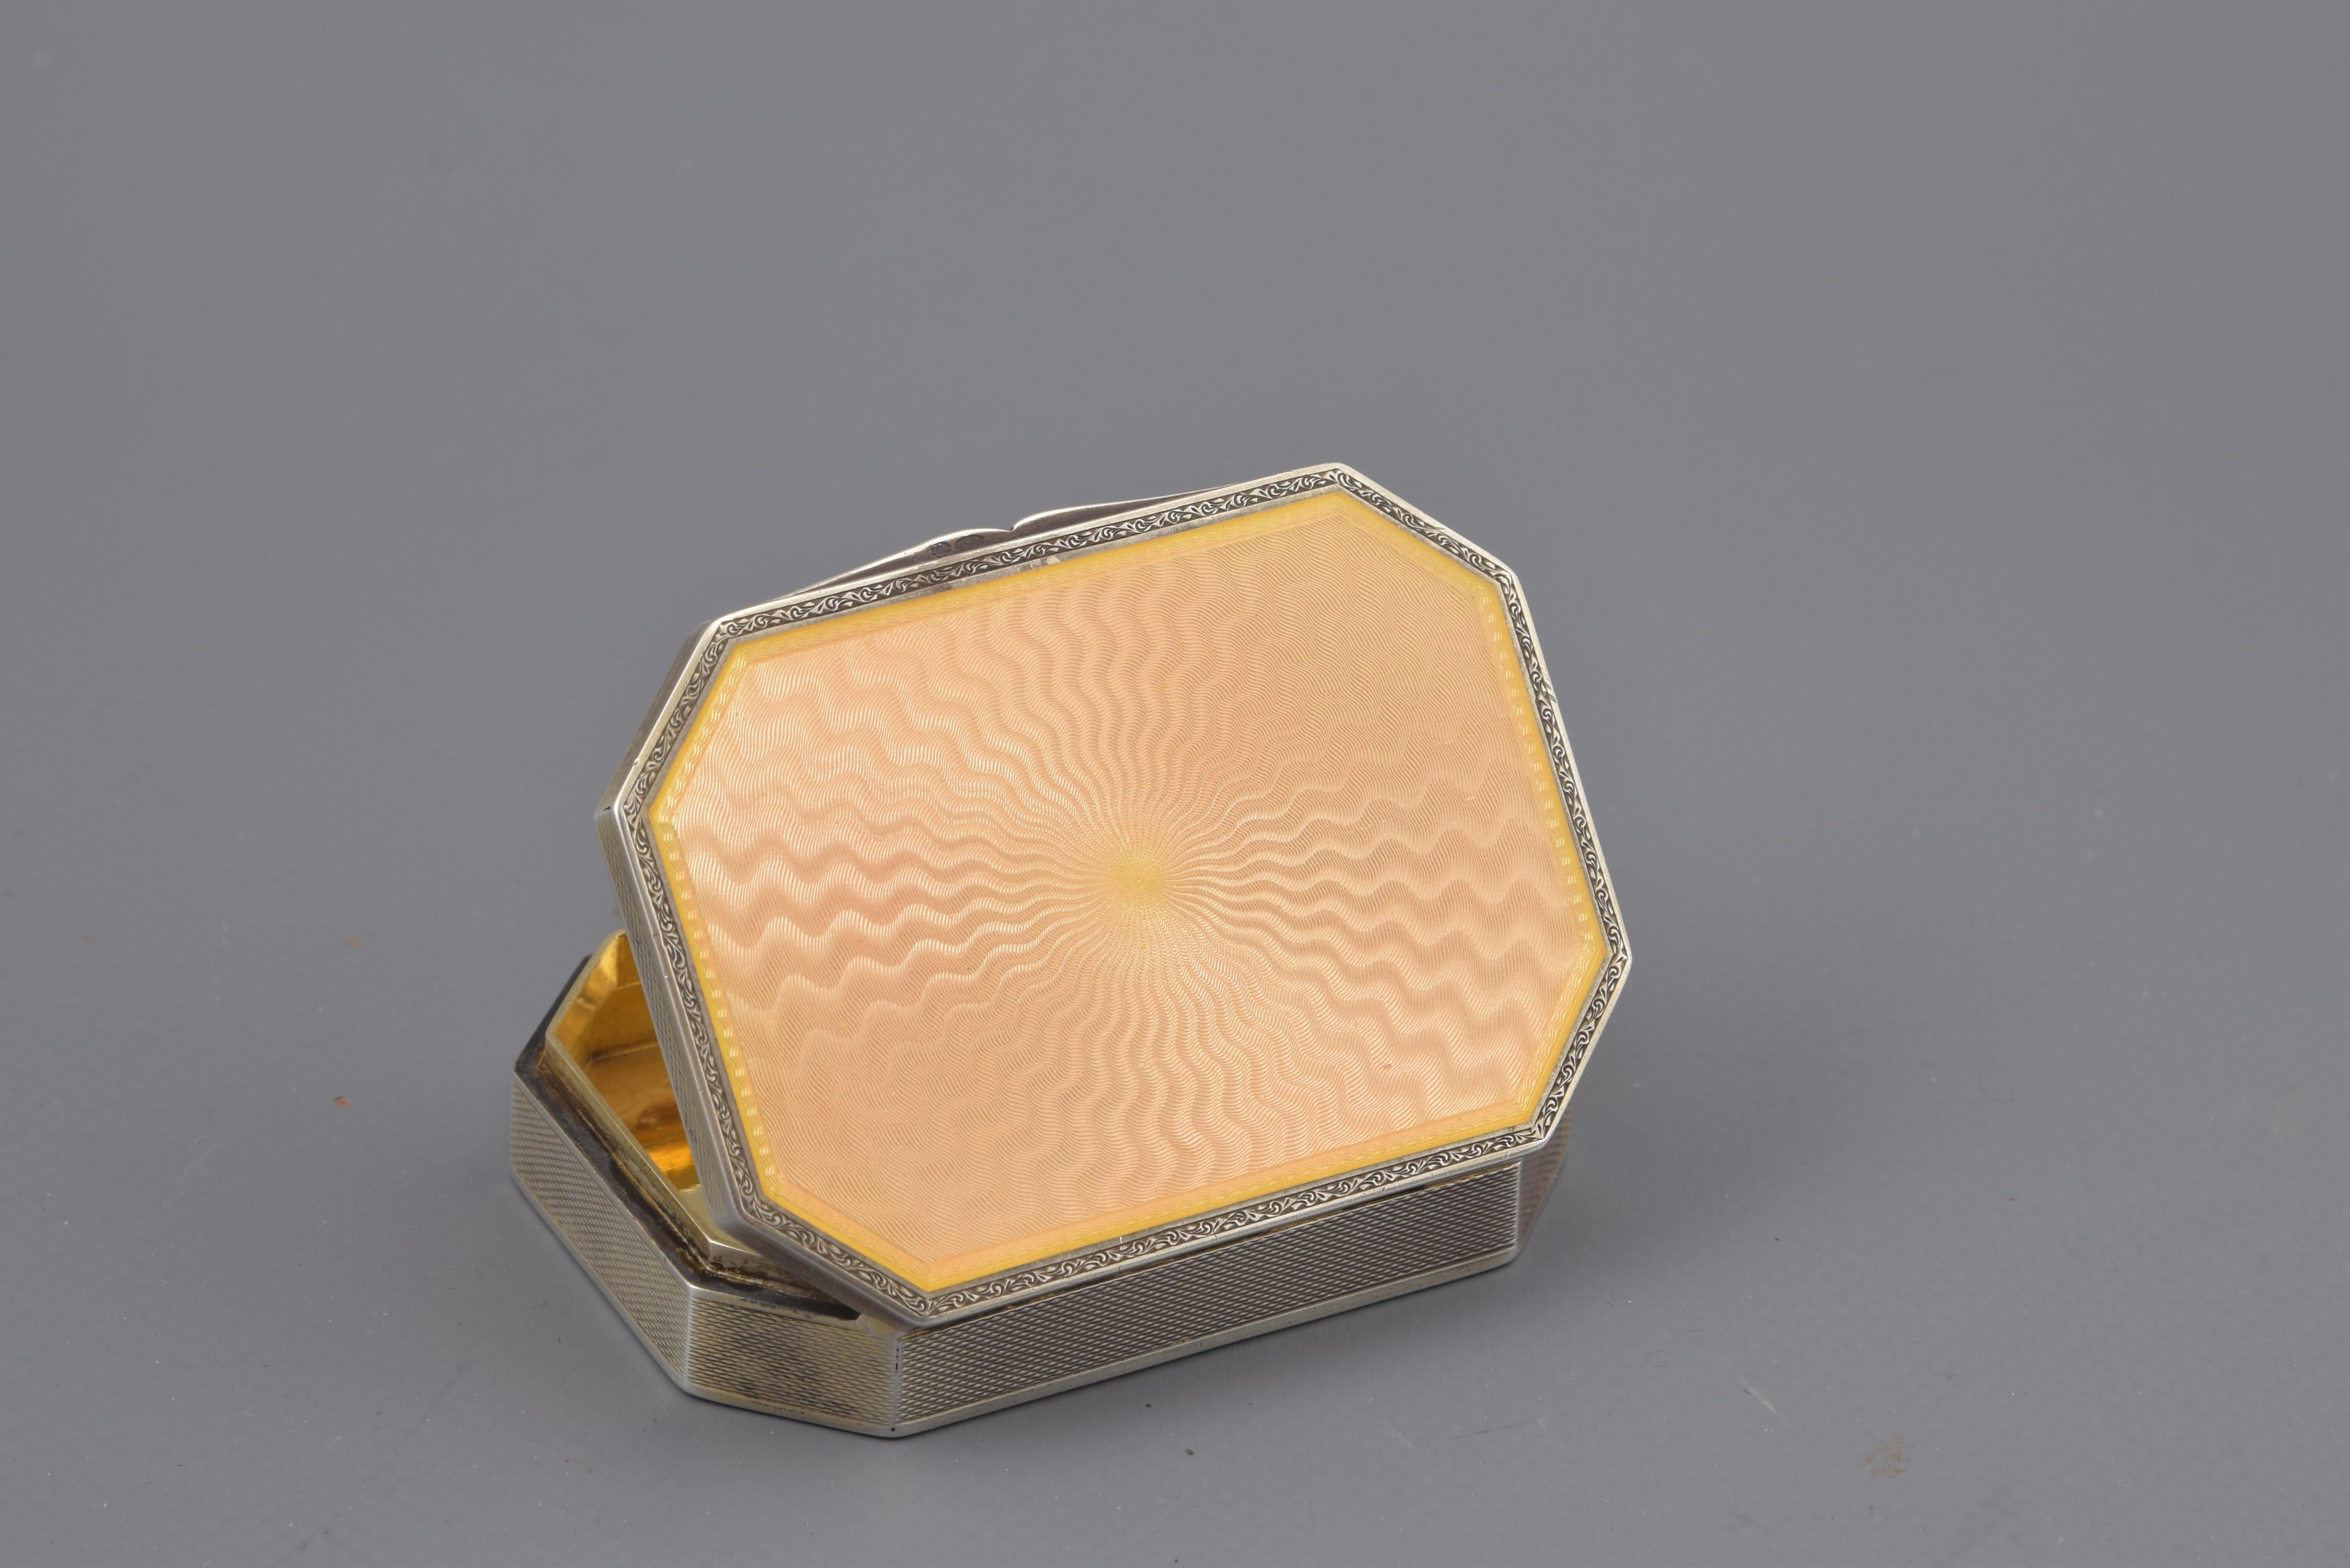 Neoclassical Silver and Enamel Box, Late 19th Century-20th Century